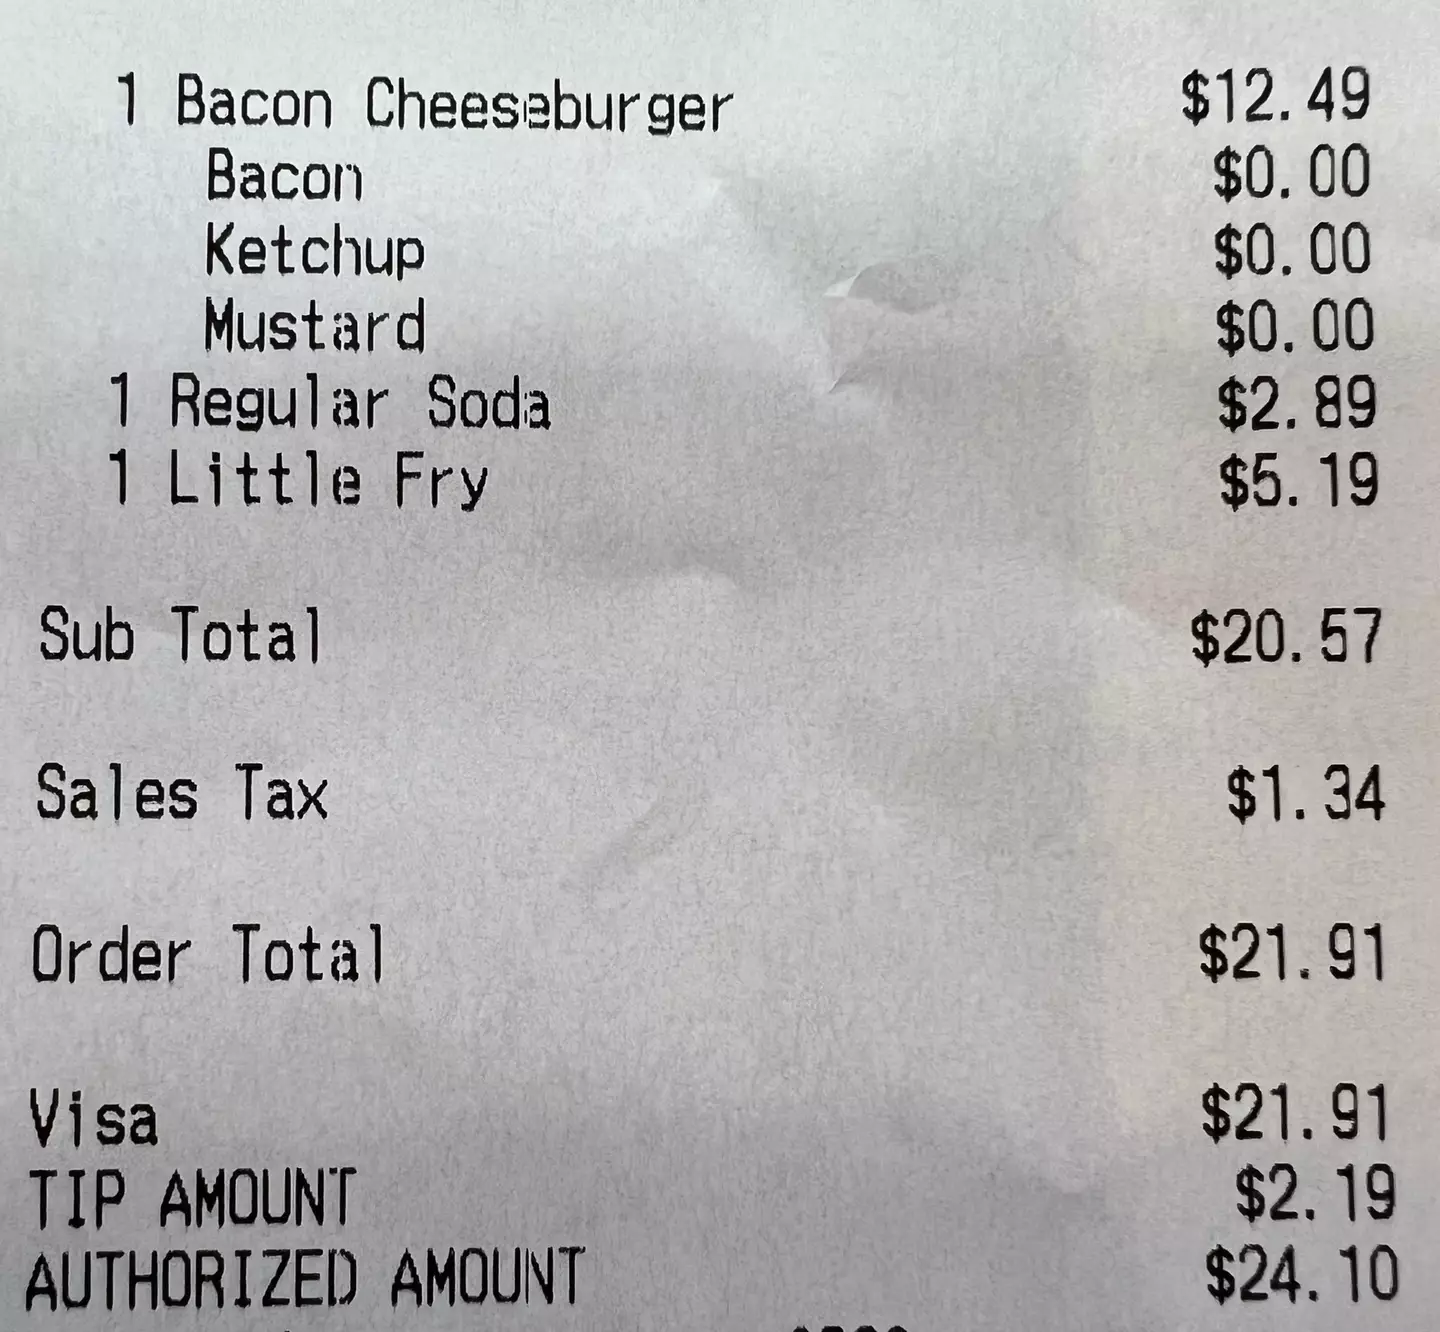 The receipt showed just how much the burger, fries, and soda cost.